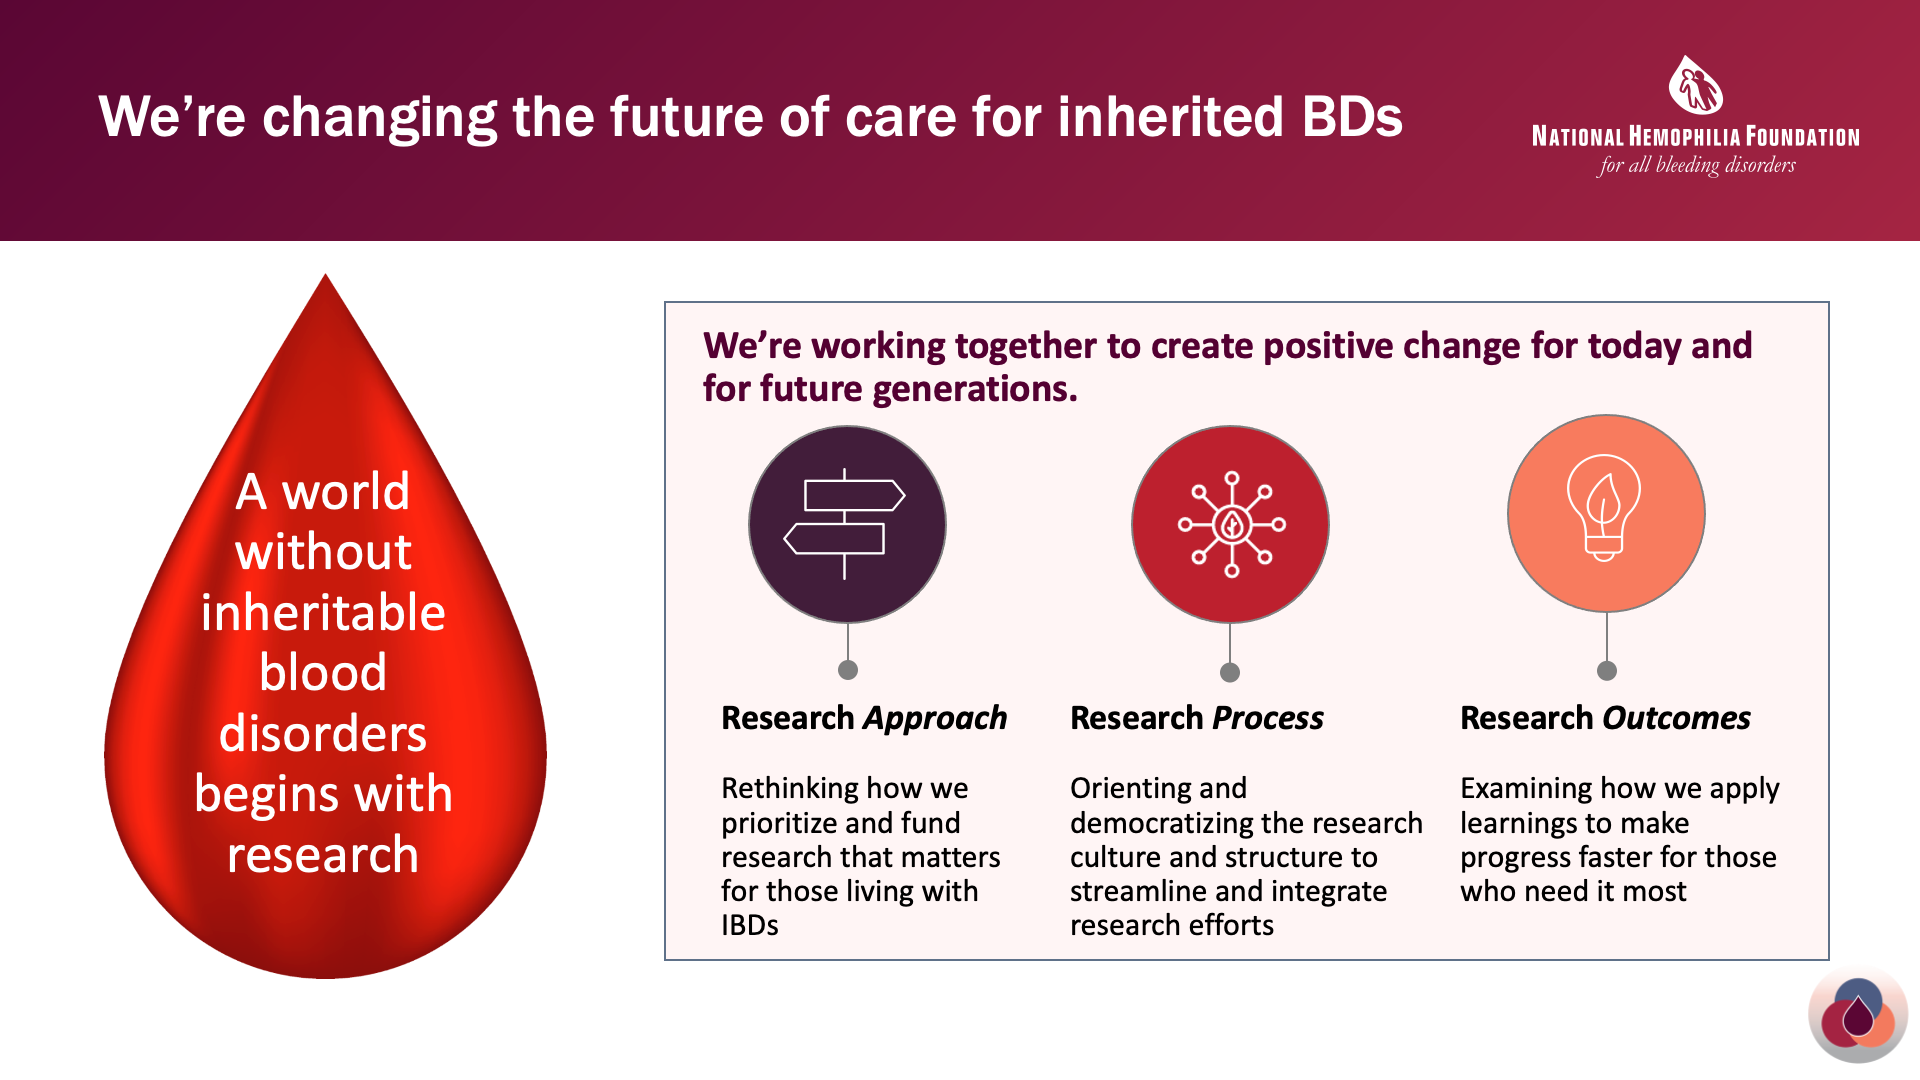 We're changing the future of care for BD's